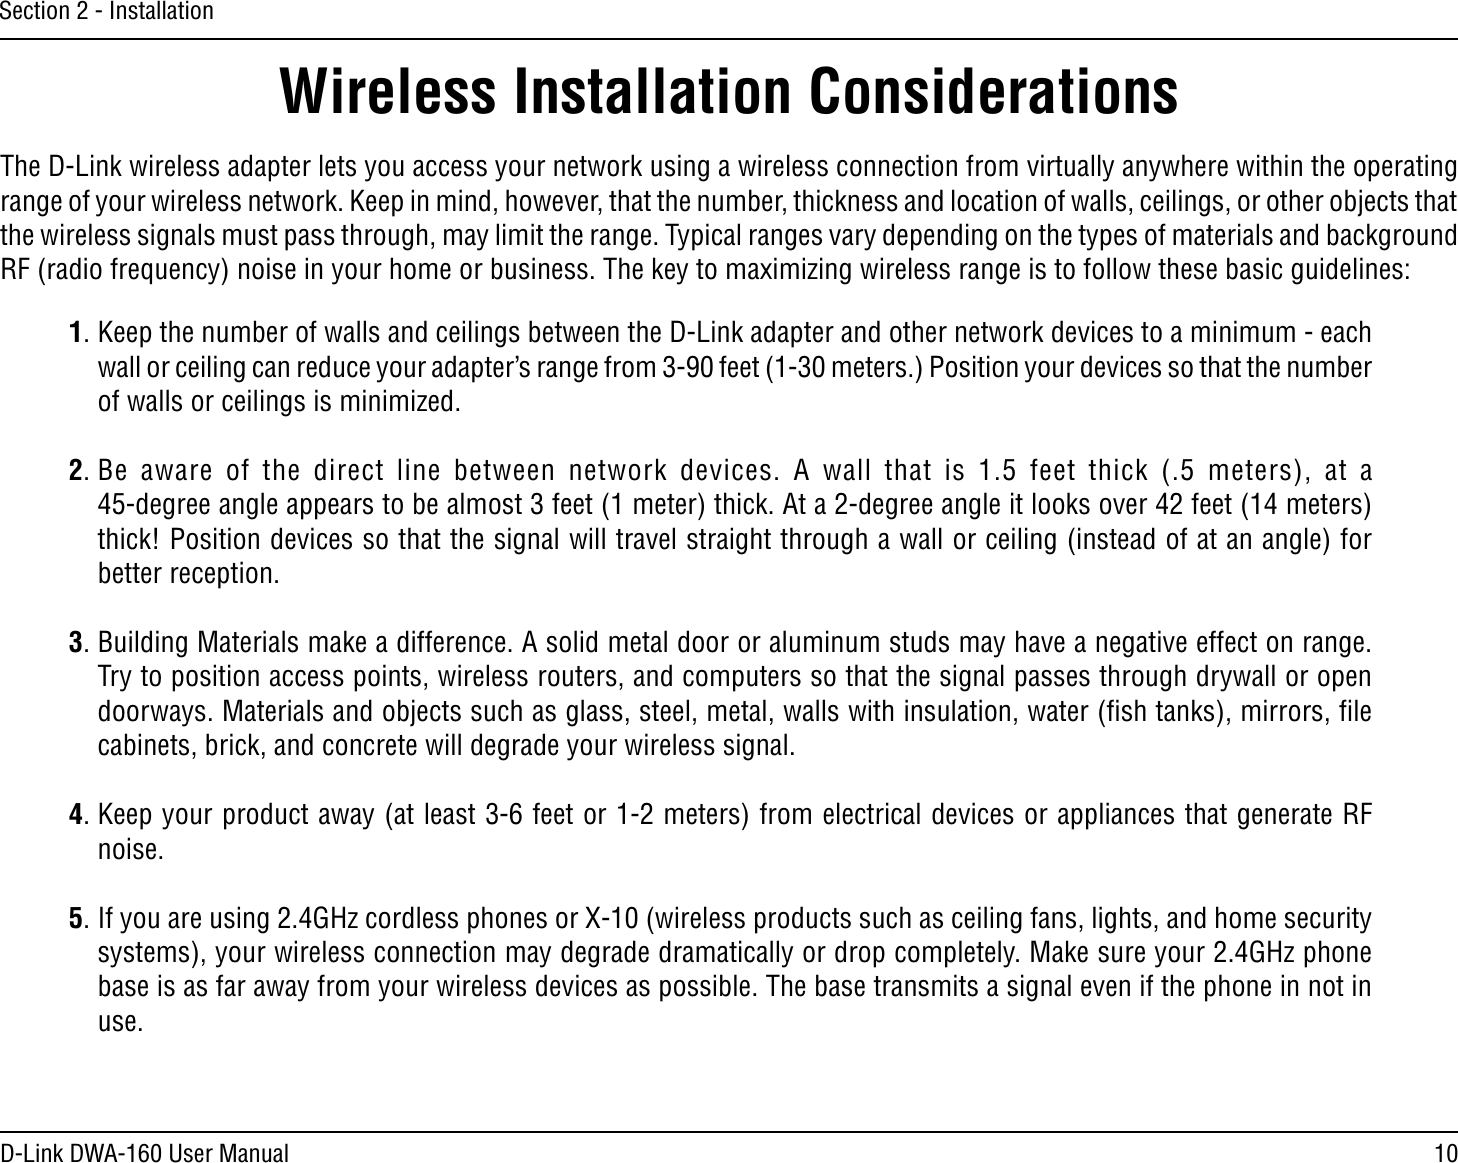 10D-Link DWA-160 User ManualSection 2 - InstallationWireless Installation ConsiderationsThe D-Link wireless adapter lets you access your network using a wireless connection from virtually anywhere within the operating range of your wireless network. Keep in mind, however, that the number, thickness and location of walls, ceilings, or other objects that the wireless signals must pass through, may limit the range. Typical ranges vary depending on the types of materials and background 2&amp;RADIOFREQUENCYNOISEINYOURHOMEORBUSINESS4HEKEYTOMAXIMIZINGWIRELESSRANGEISTOFOLLOWTHESEBASICGUIDELINES1. Keep the number of walls and ceilings between the D-Link adapter and other network devices to a minimum - each WALLORCEILINGCANREDUCEYOURADAPTERSRANGEFROMFEETMETERS0OSITIONYOURDEVICESSOTHATTHENUMBEROFWALLSORCEILINGSISMINIMIZED2. Be aware of the direct line between network devices. A wall that is 1.5 feet thick (.5 meters), at a  45-degree angle appears to be almost 3 feet (1 meter) thick. At a 2-degree angle it looks over 42 feet (14 meters) thick! Position devices so that the signal will travel straight through a wall or ceiling (instead of at an angle) for better reception.3. Building Materials make a difference. A solid metal door or aluminum studs may have a negative effect on range. Try to position access points, wireless routers, and computers so that the signal passes through drywall or open doorways. Materials and objects such as glass, steel, metal, walls with insulation, water (ﬁsh tanks), mirrors, ﬁle cabinets, brick, and concrete will degrade your wireless signal.4. Keep your product away (at least 3-6 feet or 1-2 meters) from electrical devices or appliances that generate RF noise.5)FYOUAREUSING&apos;(ZCORDLESSPHONESOR8WIRELESSPRODUCTSSUCHASCEILINGFANSLIGHTSANDHOMESECURITYSYSTEMSYOURWIRELESSCONNECTIONMAYDEGRADEDRAMATICALLYORDROPCOMPLETELY-AKESUREYOUR&apos;(ZPHONEbase is as far away from your wireless devices as possible. The base transmits a signal even if the phone in not in use.